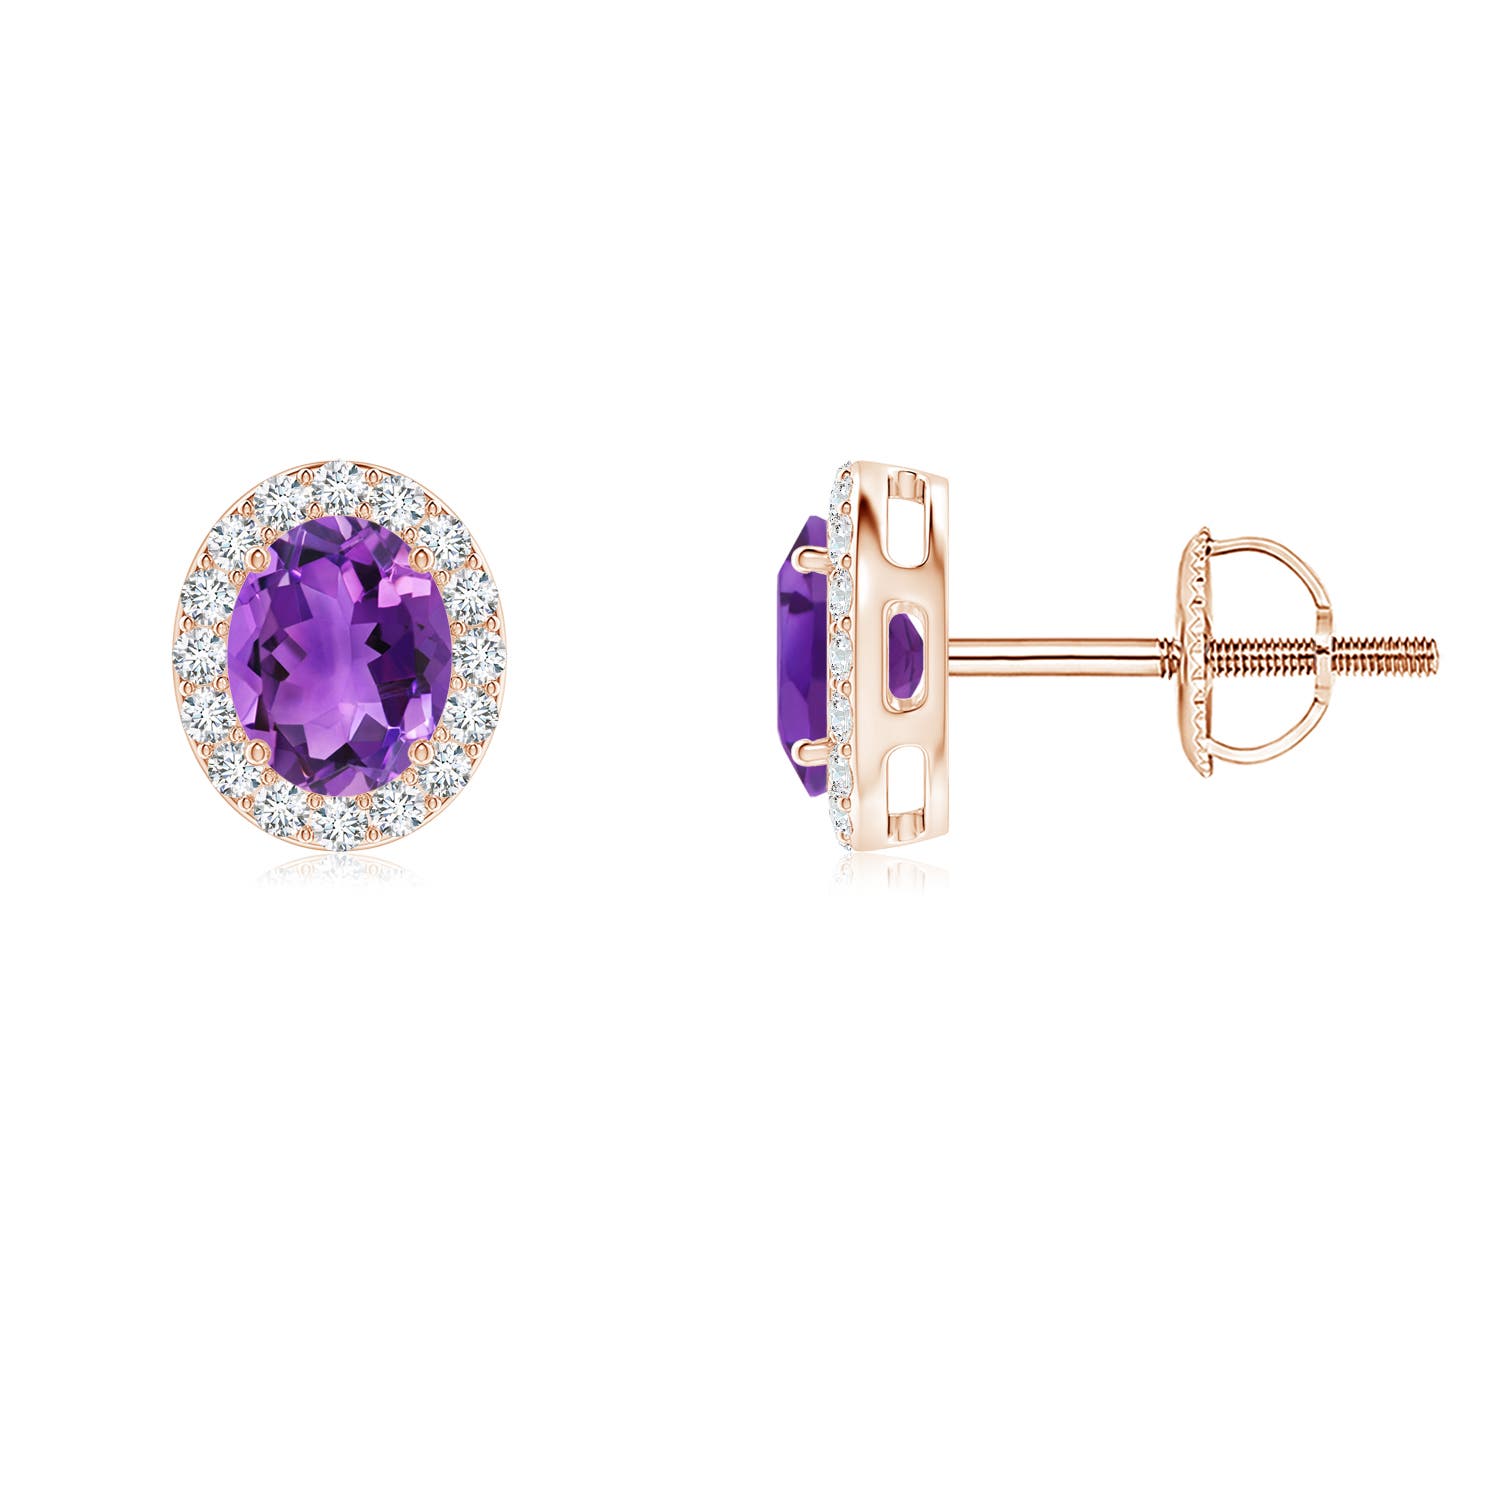 AAA - Amethyst / 0.76 CT / 14 KT Rose Gold